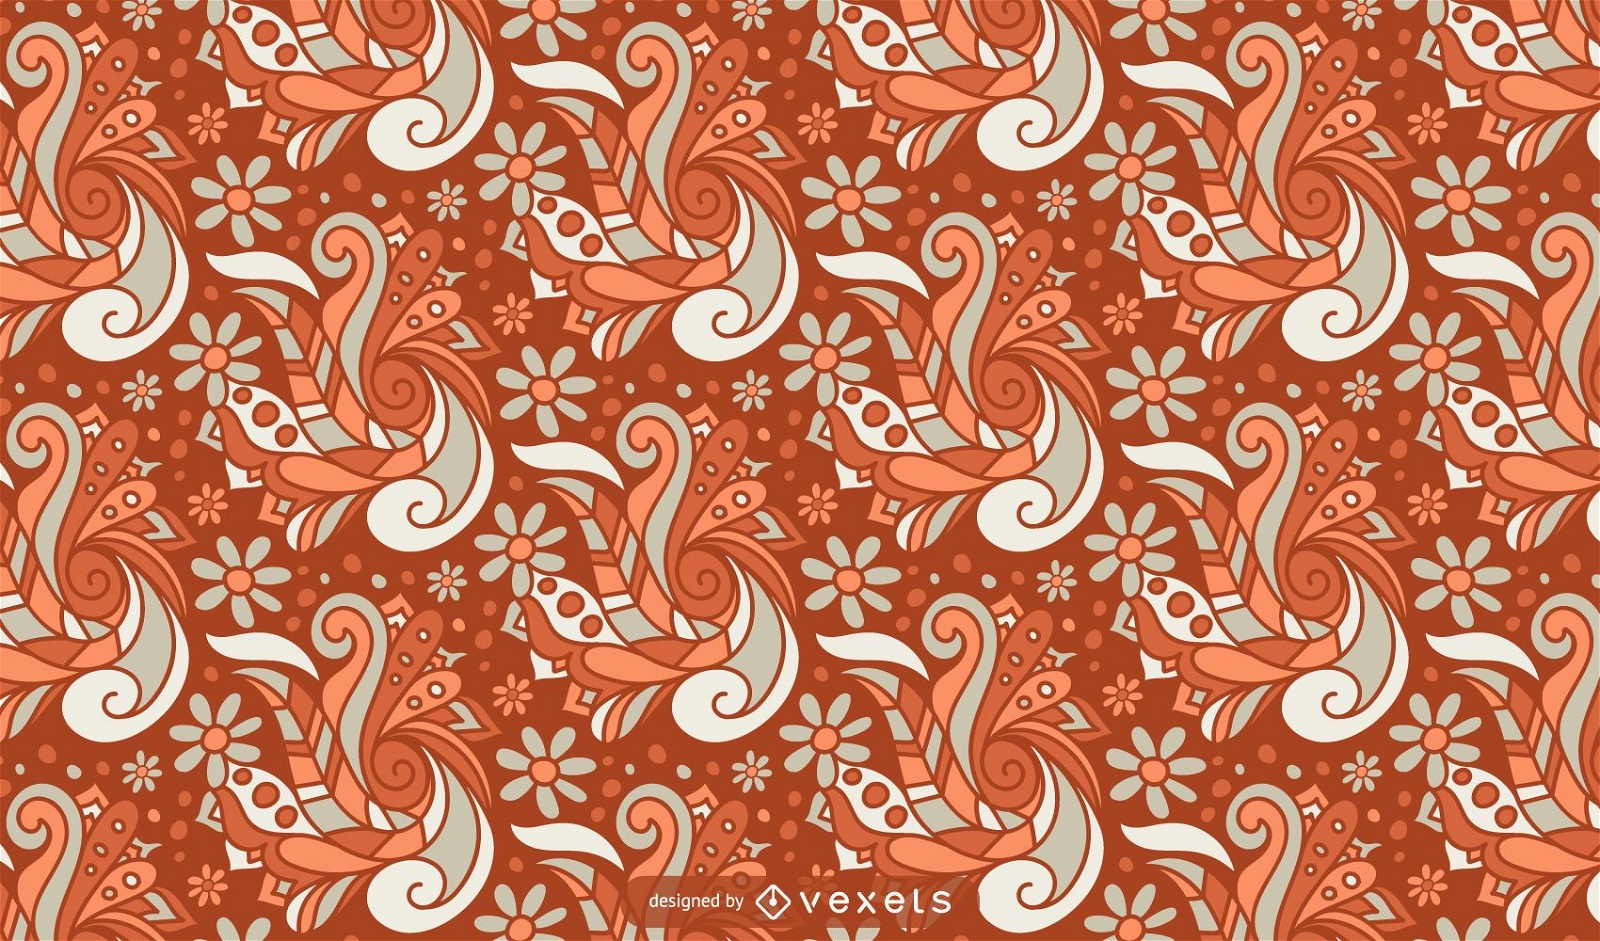 Retro floral abstract pattern